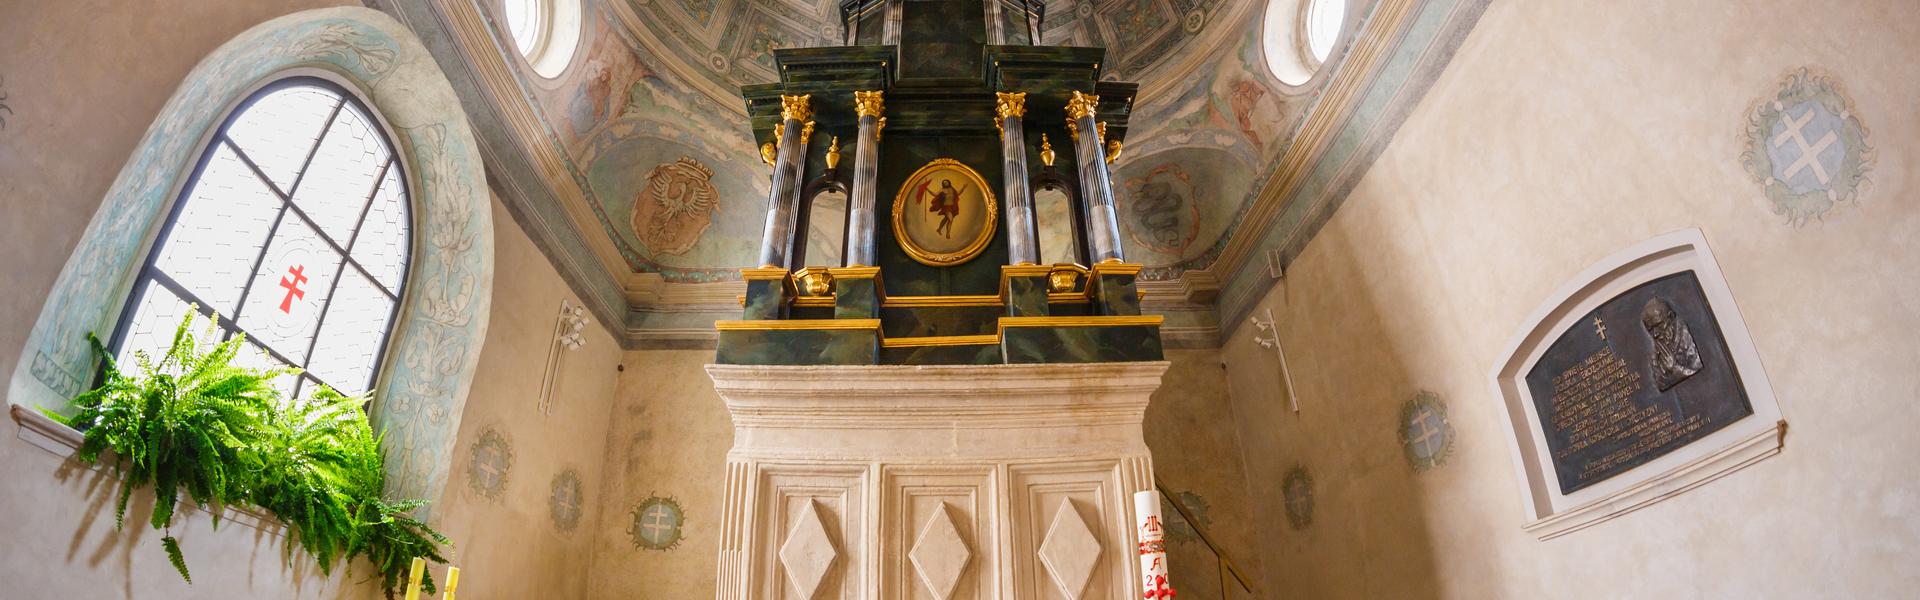 A faithful copy of the Holy Sepulchre in the Church in Miechów